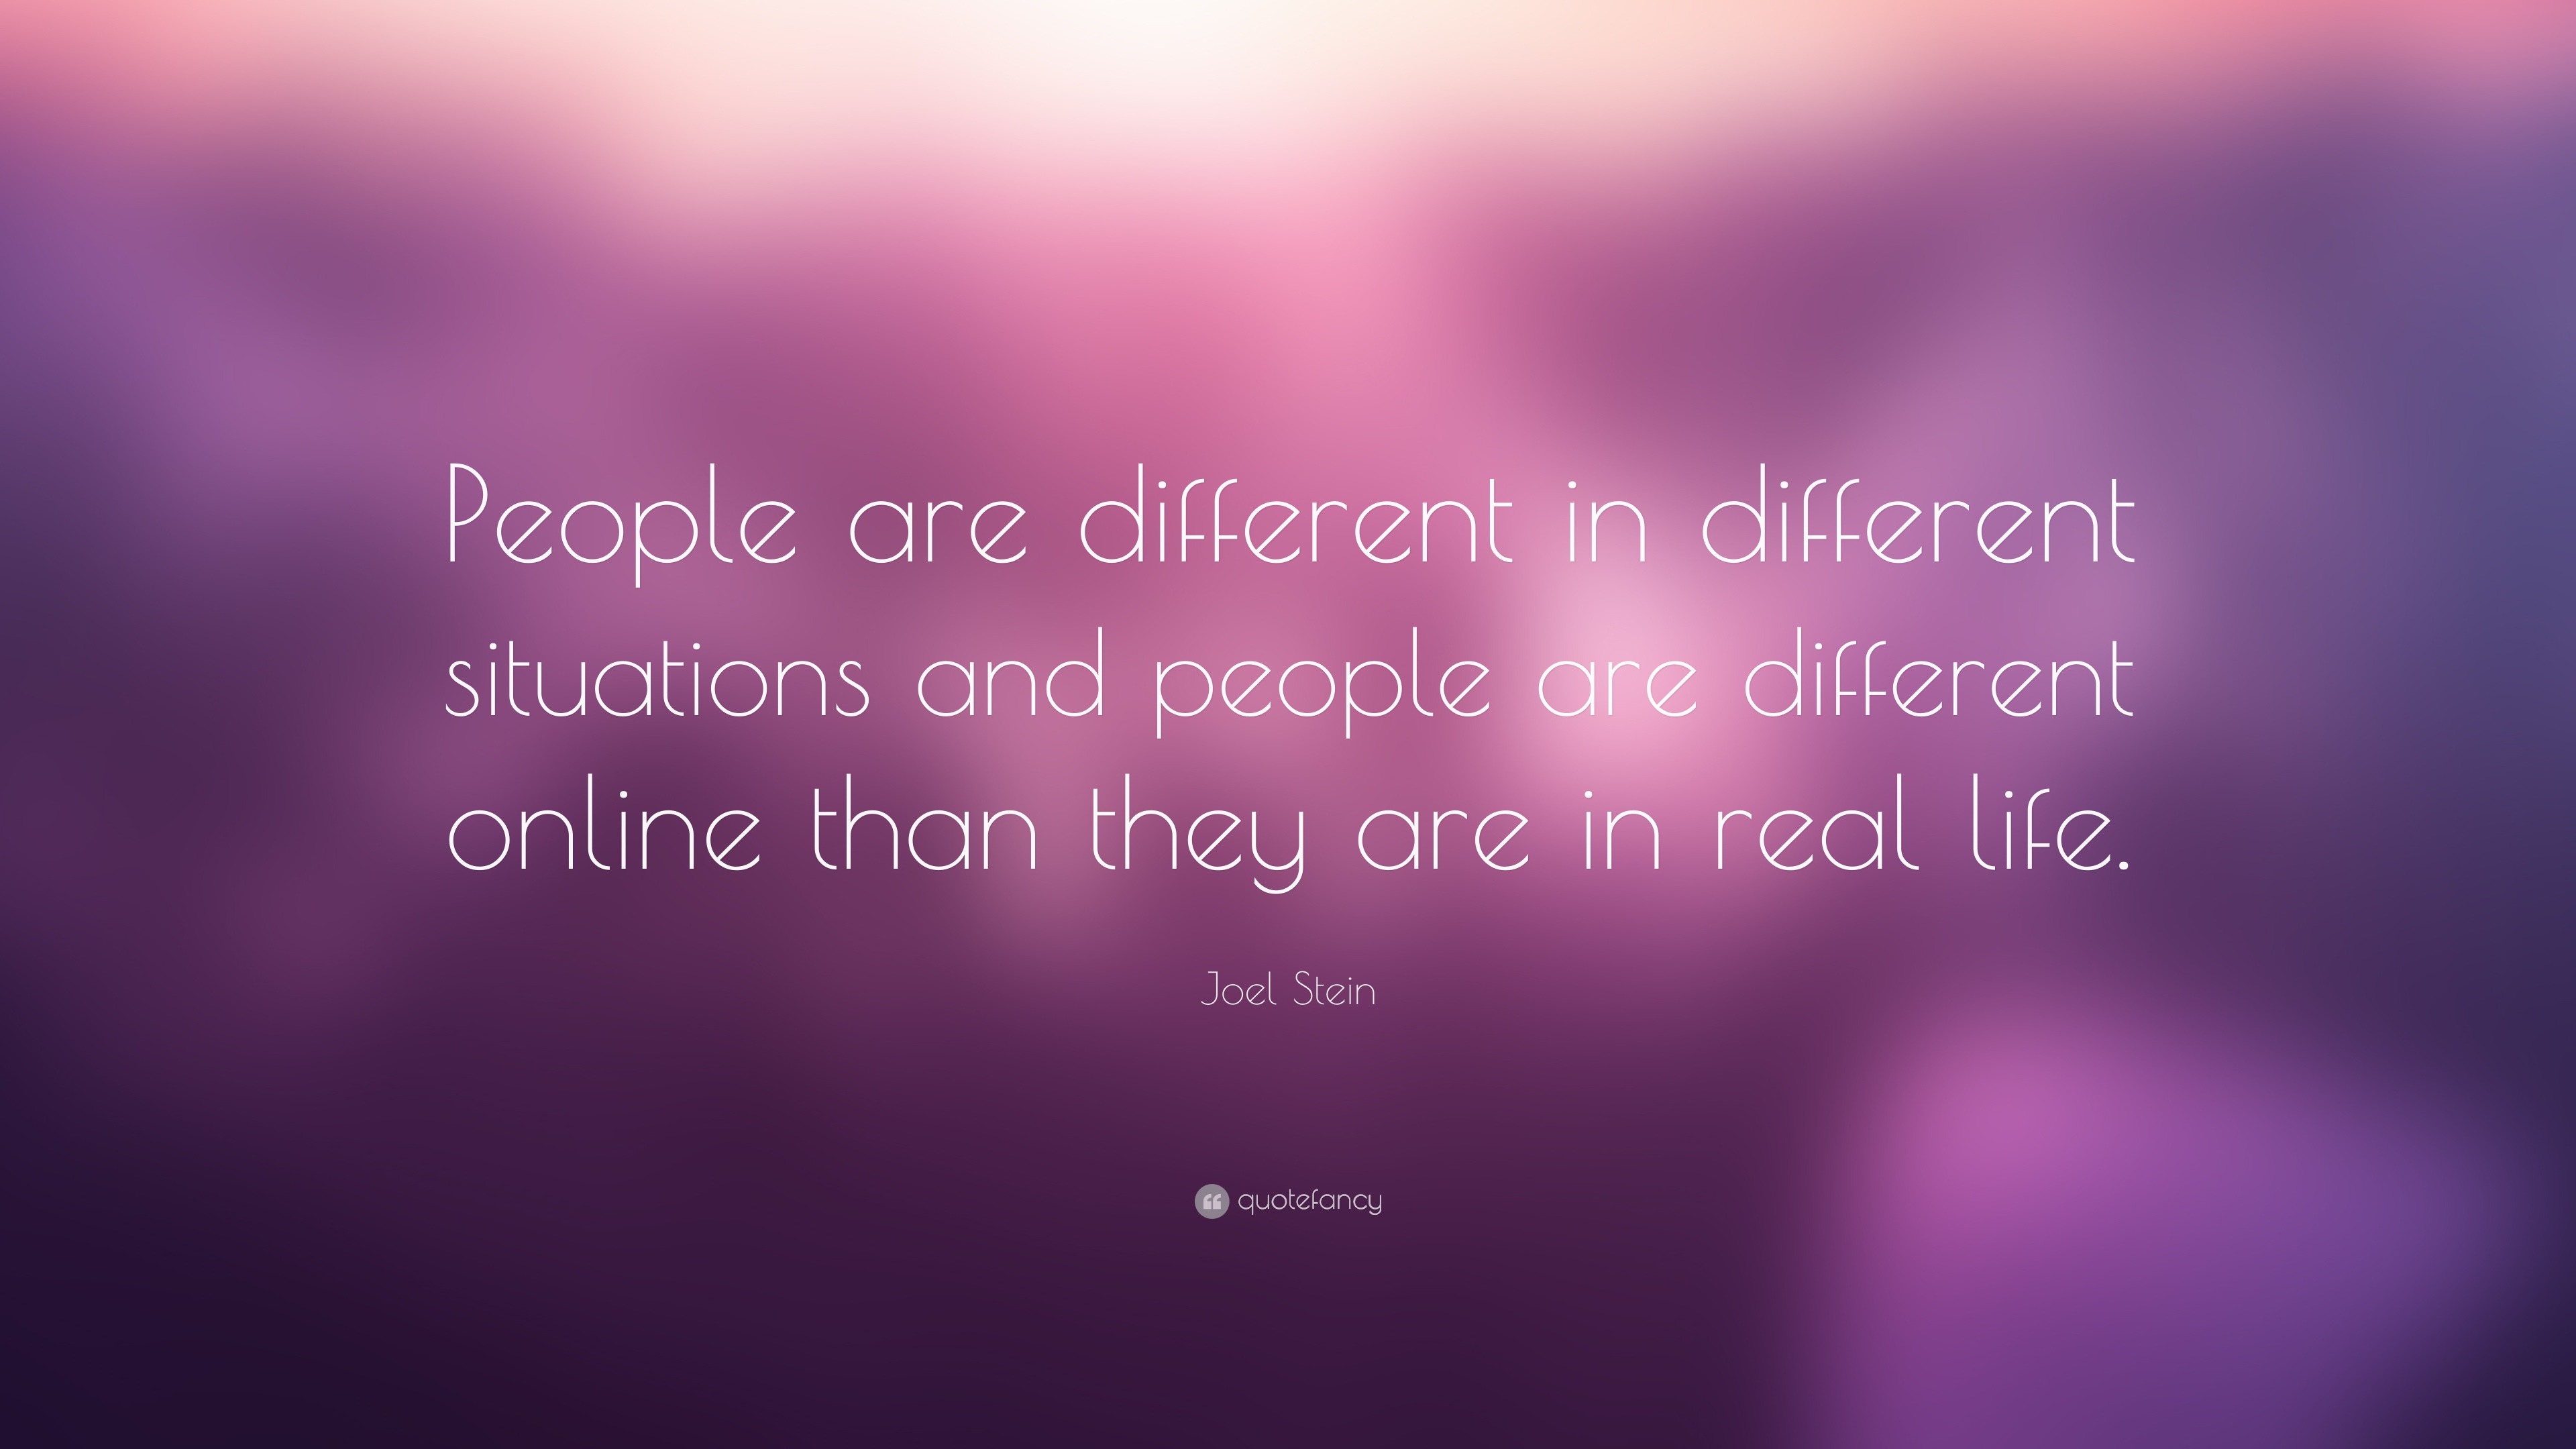 Joel Stein Quote: “People are different in different situations and ...